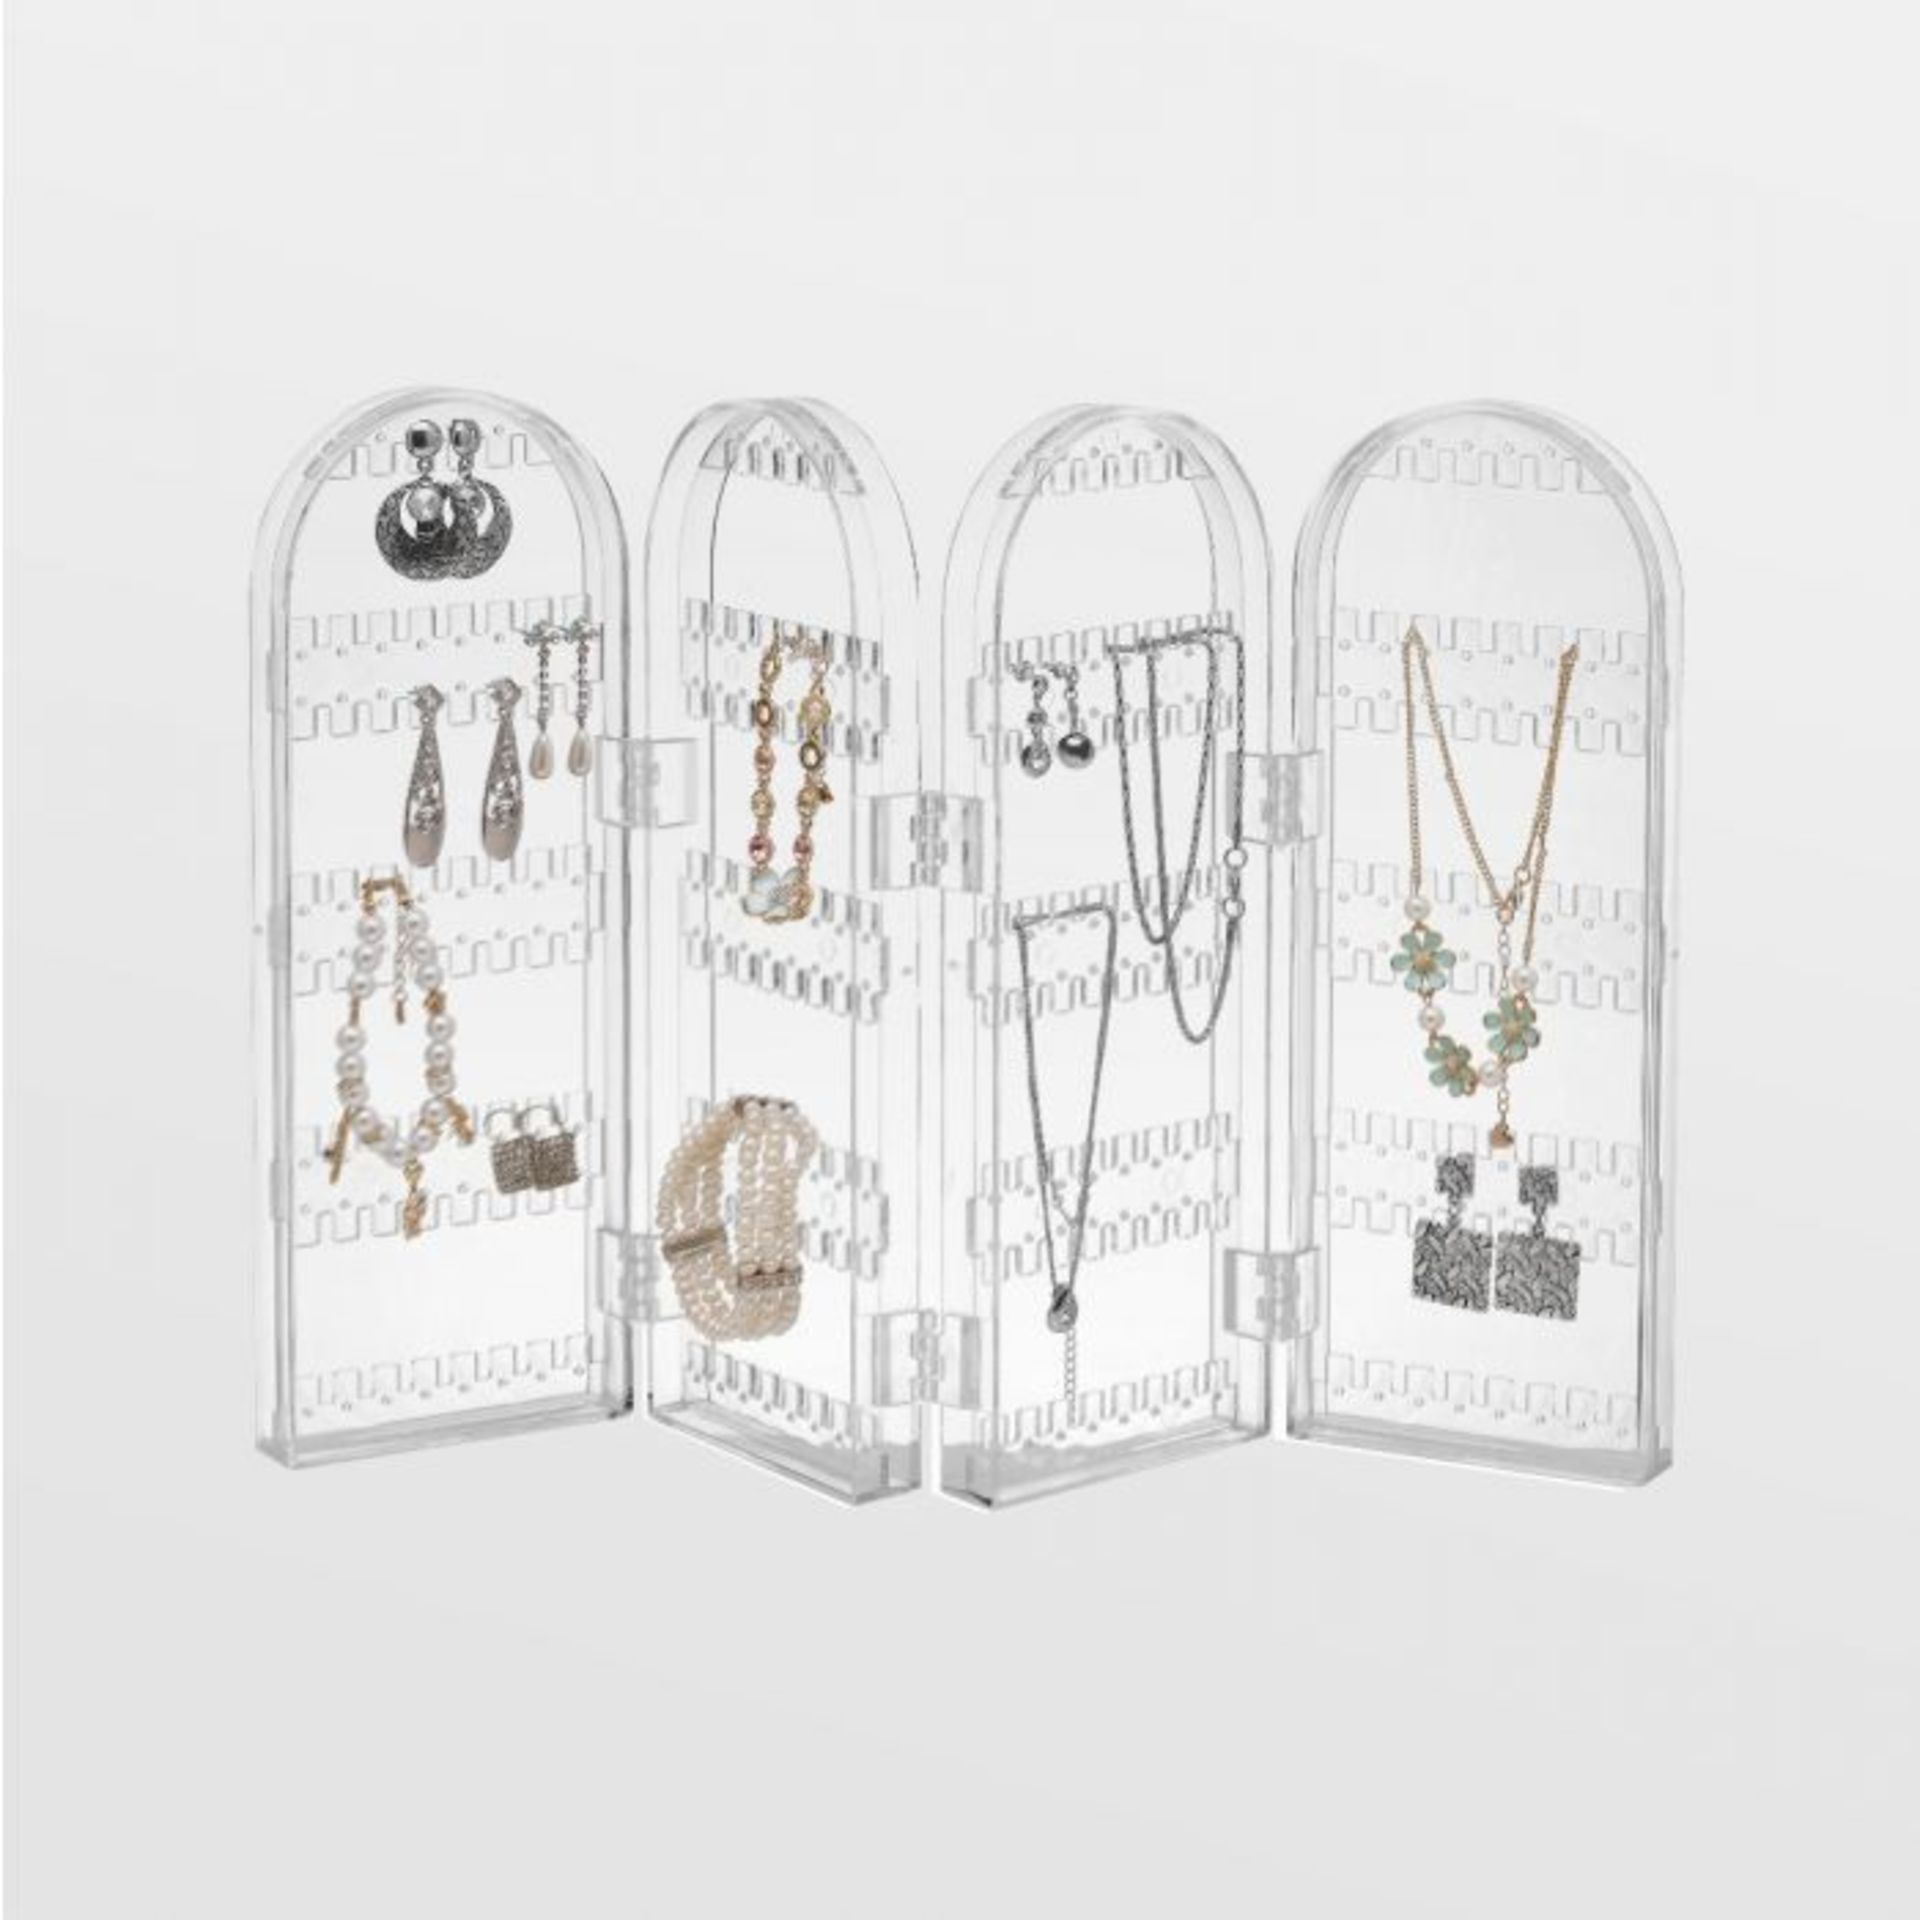 Foldable Jewellery Hanger. Keep your earrings perfectly organised with the Beautify Jewellery